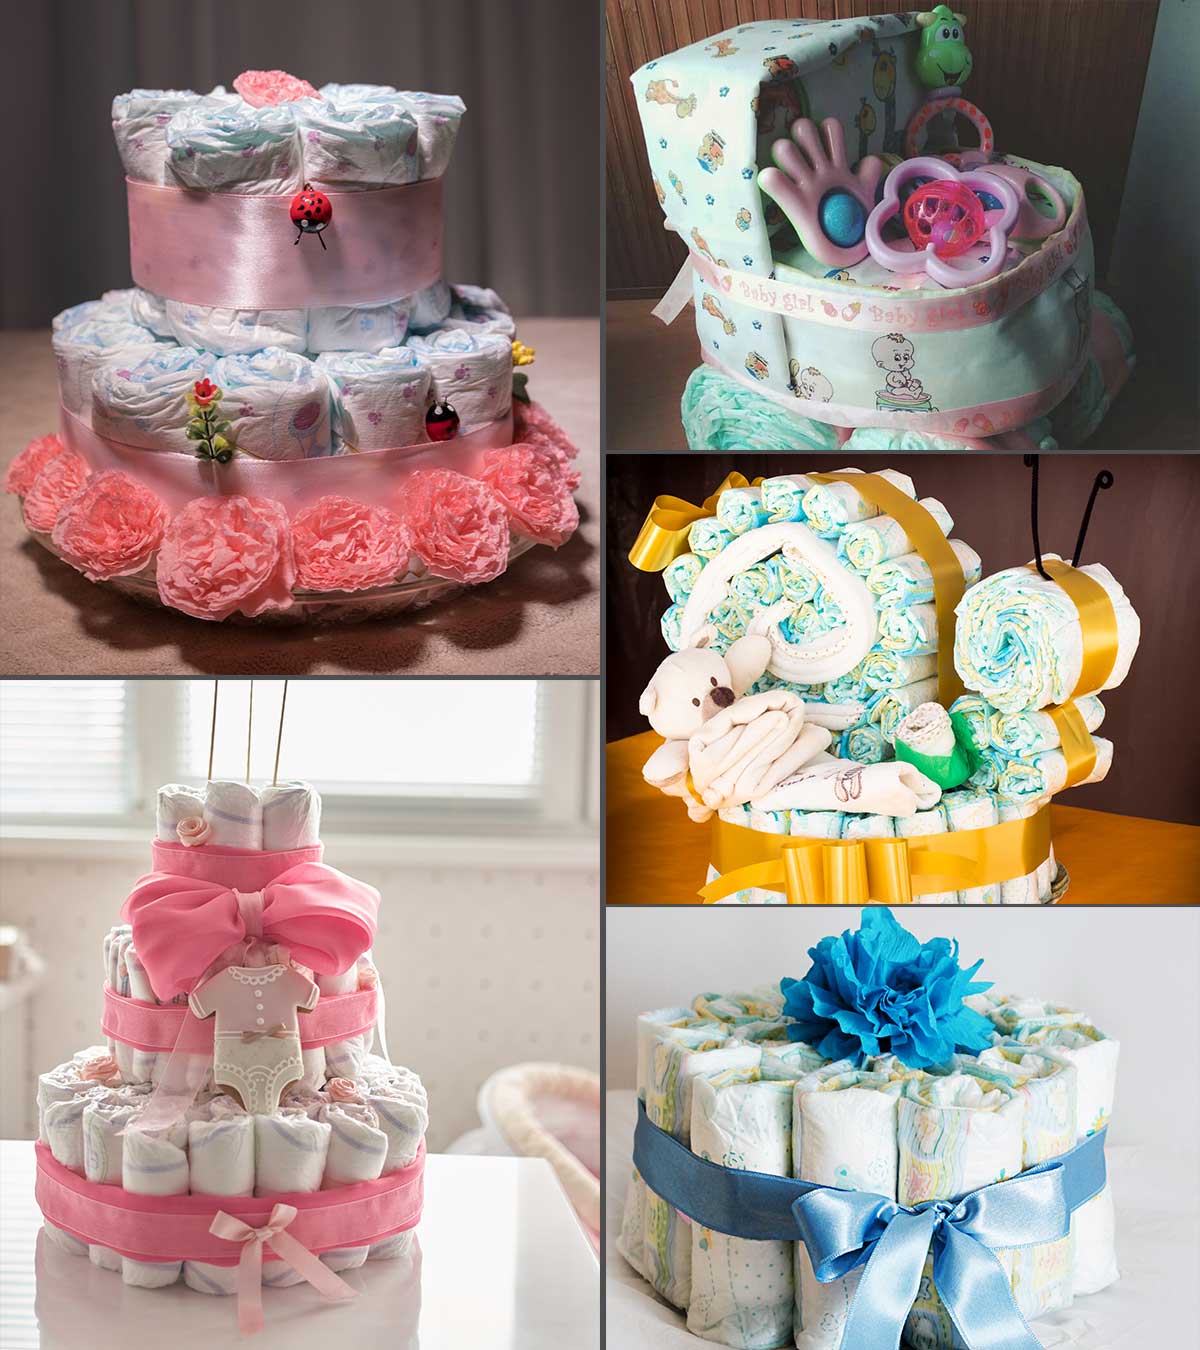 10 Stunning DIY Diaper Cake Ideas To Decorate The Place